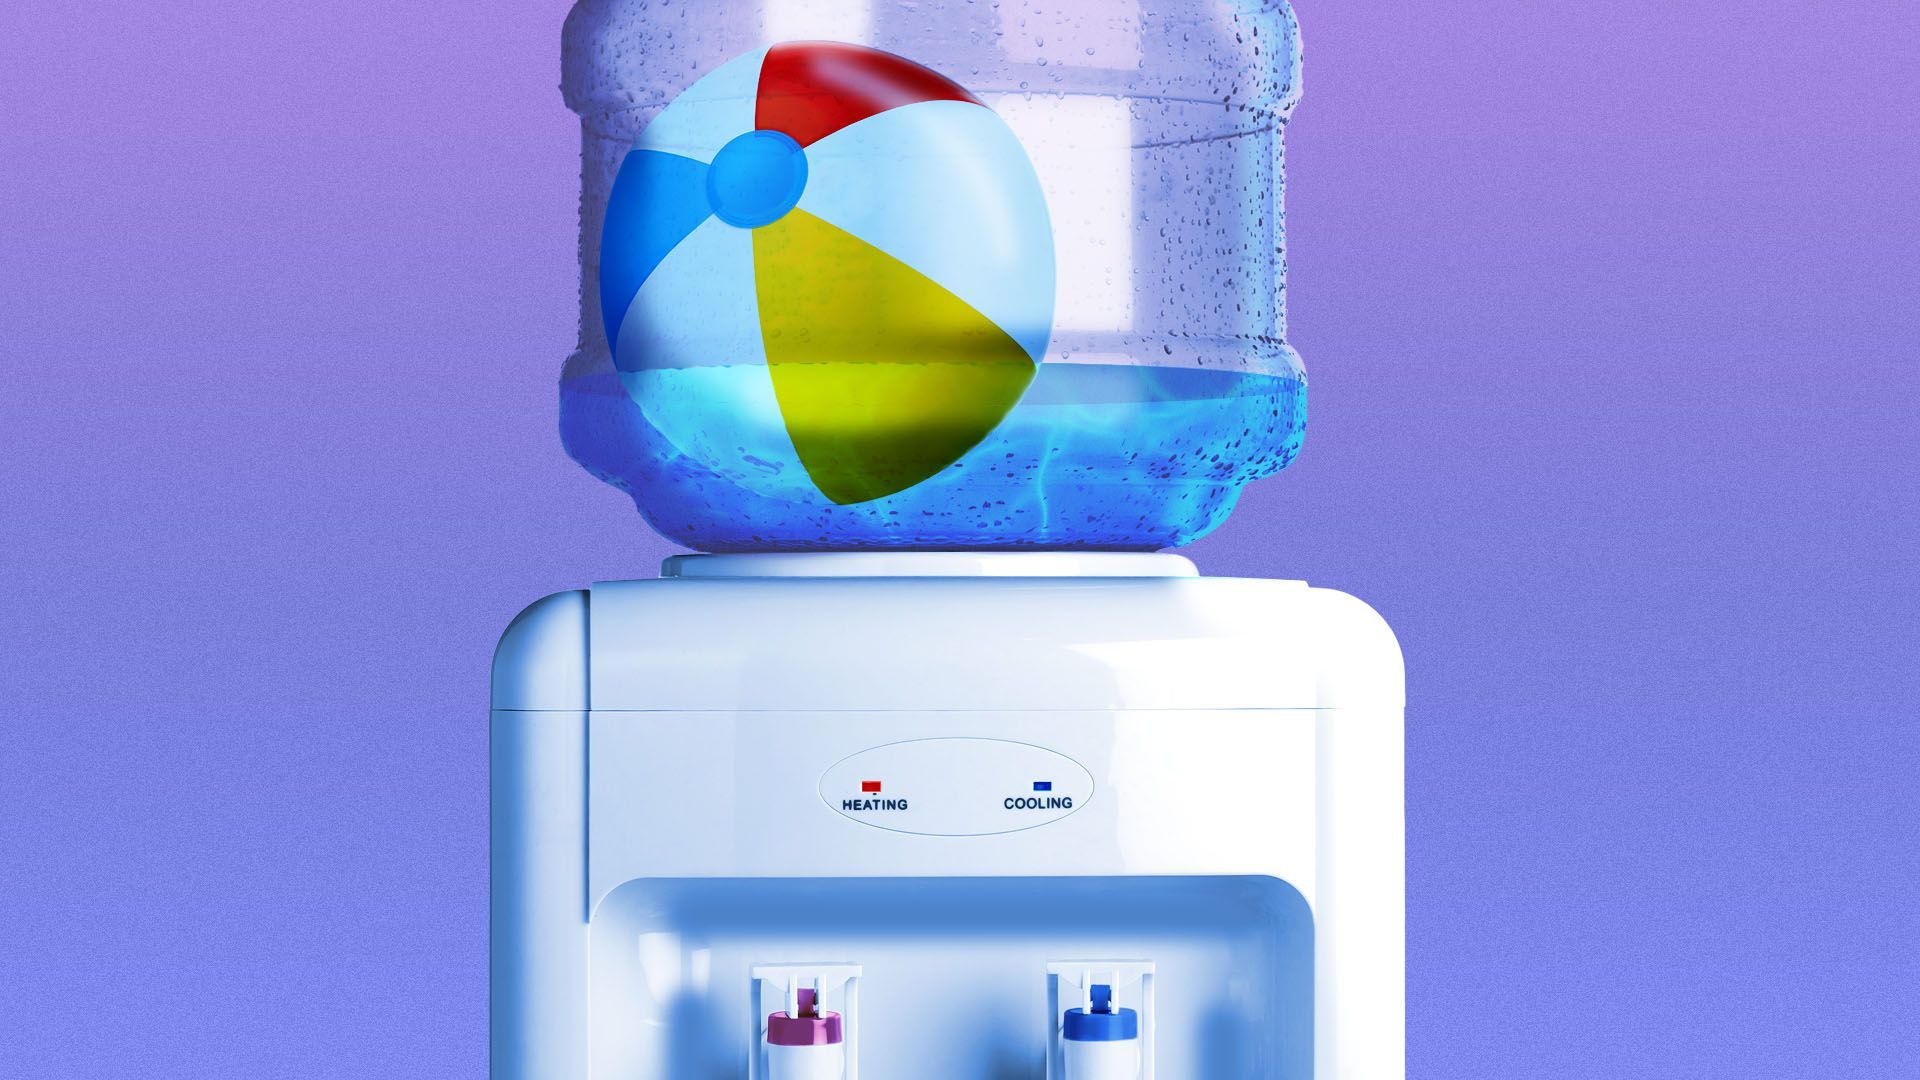 Illustration of an office water cooler with a beach ball inside